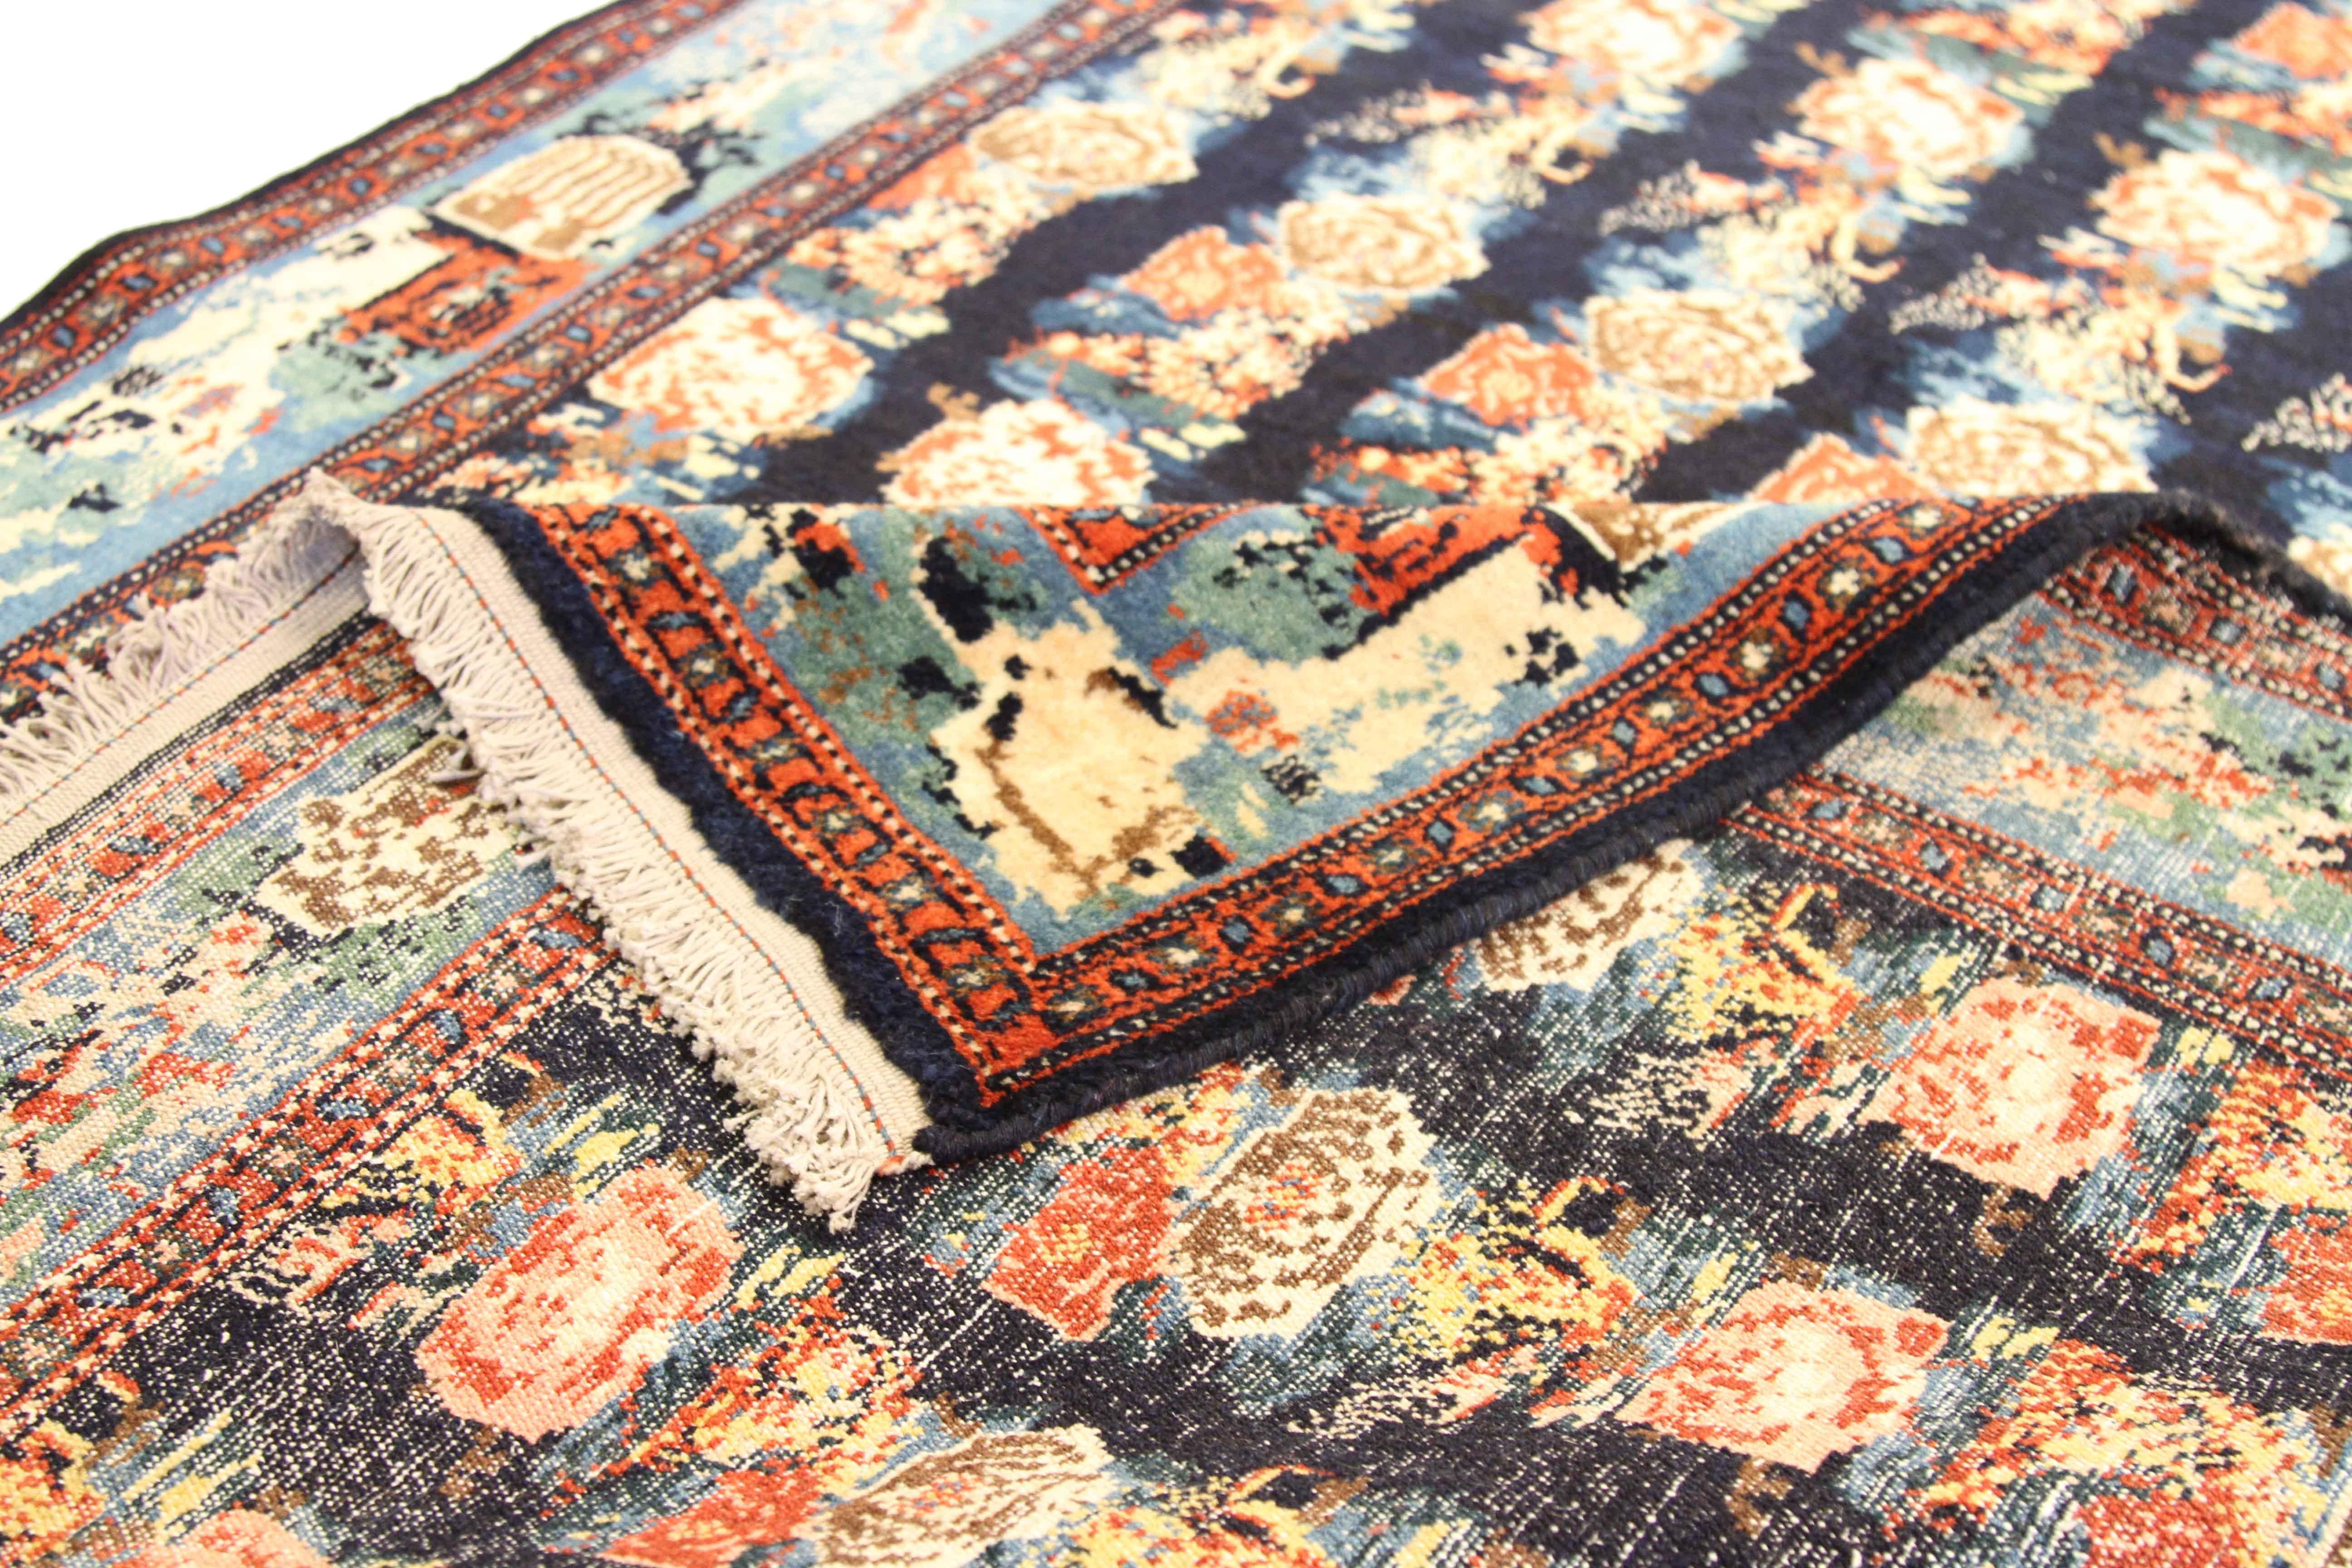 Antique Persian rug made by hand in the 1910s. It’s from the finest wool and vegetable dyes woven in the tradition of Seneh weavers. A captivating mix of black, blue, green and red make the repeating floral patterns easy on the eyes. It’s great for